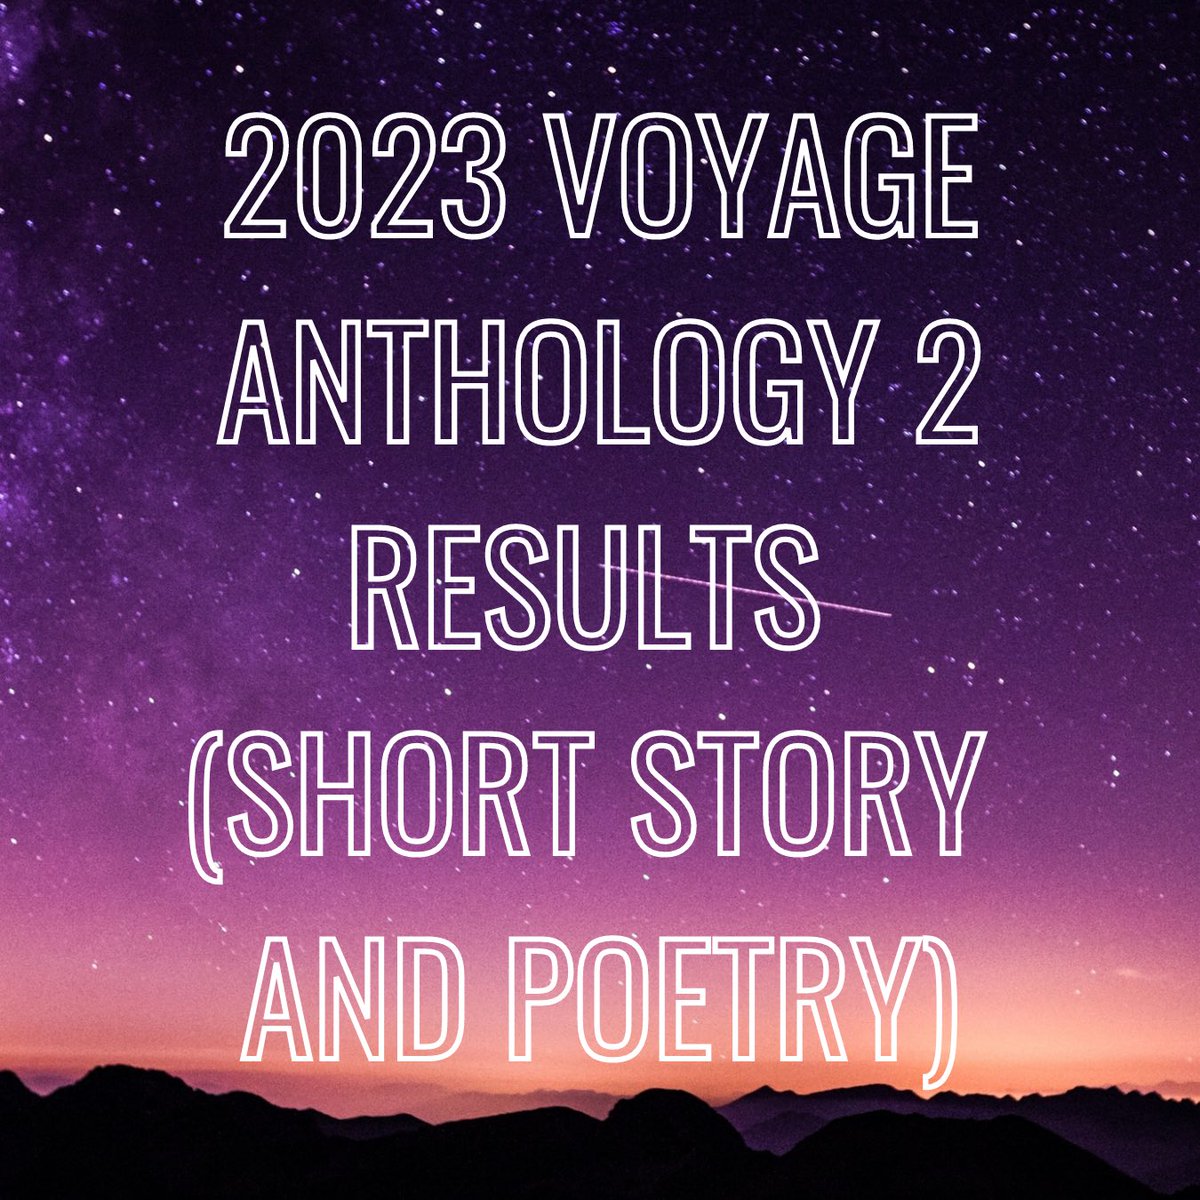 ANDDDDD the results are in! Here are the short stories and poems selected for our second anthology! Congratulations, writers! (Creative nonfiction and novel excerpt selections are forthcoming!) 🎉 unchartedmag.com/2023-voyage-an… #yalit #amreadingya